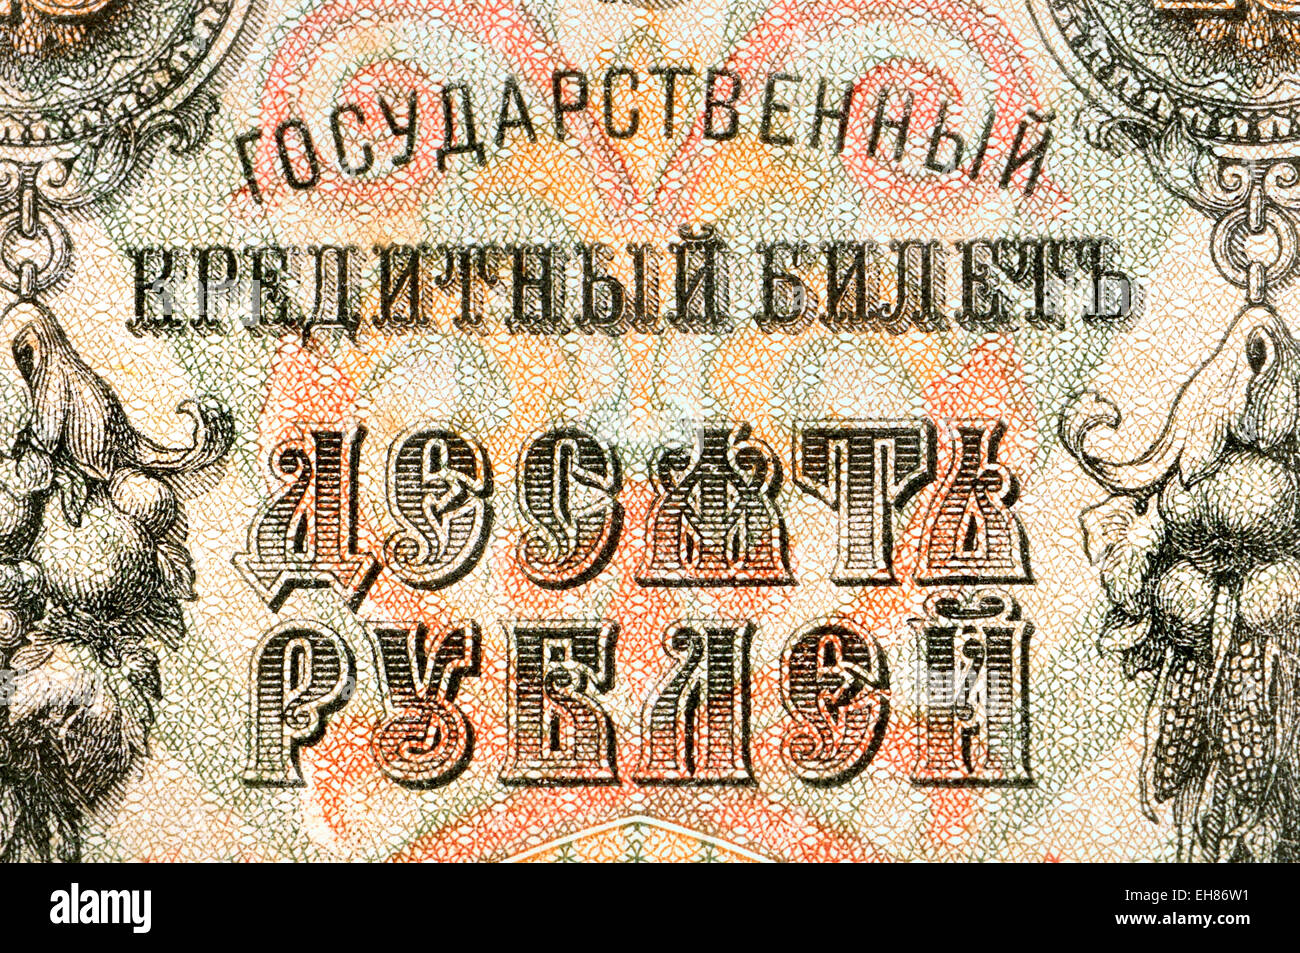 Detail from a 1909 Russian 10 Rouble banknote / credit note showing Cyrillic script and intricate design Stock Photo